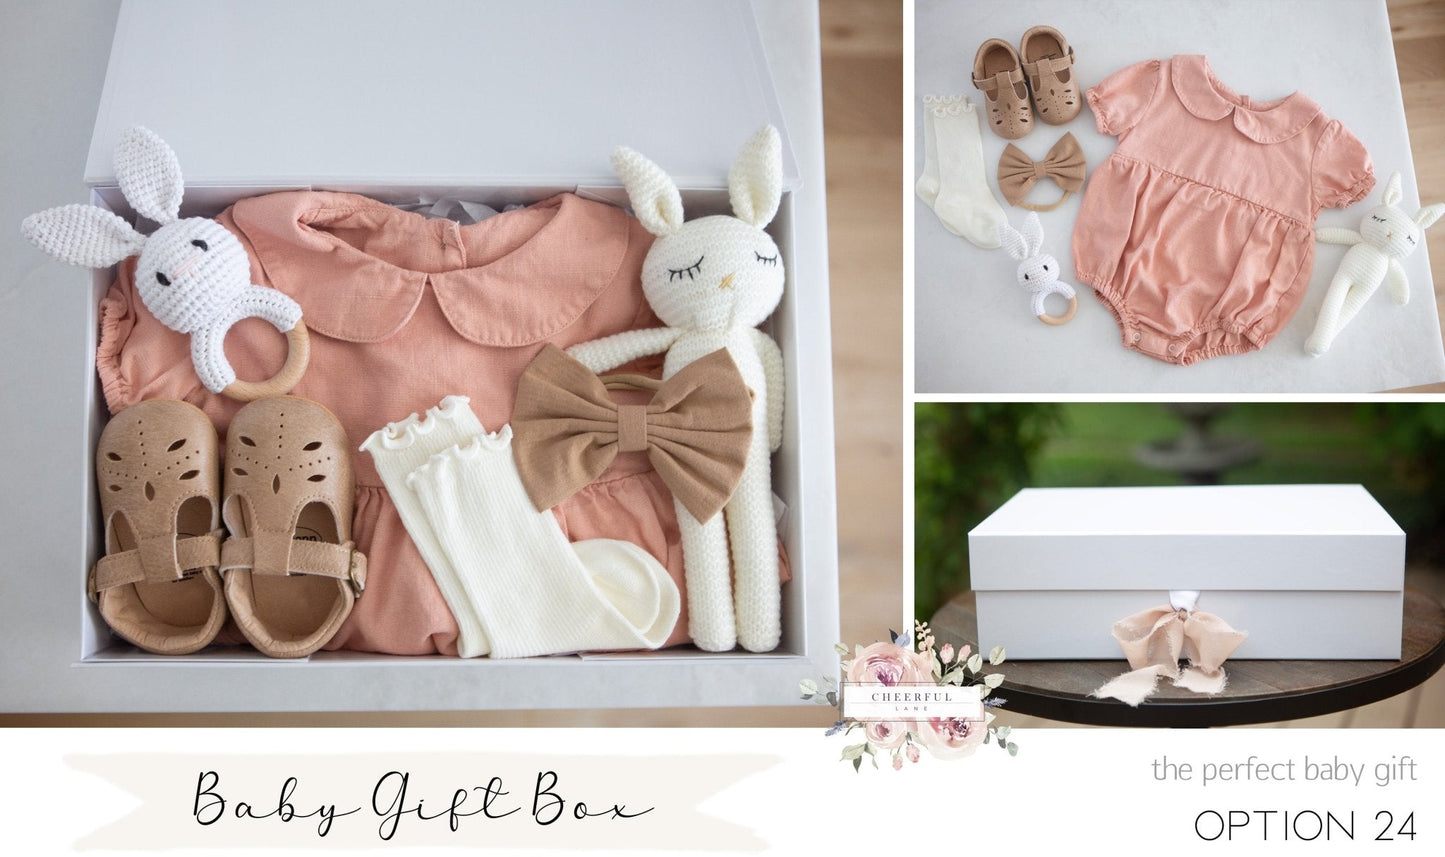 Baby Gift Box for baby girl - includes personalized gift tag - Cheerful Lane